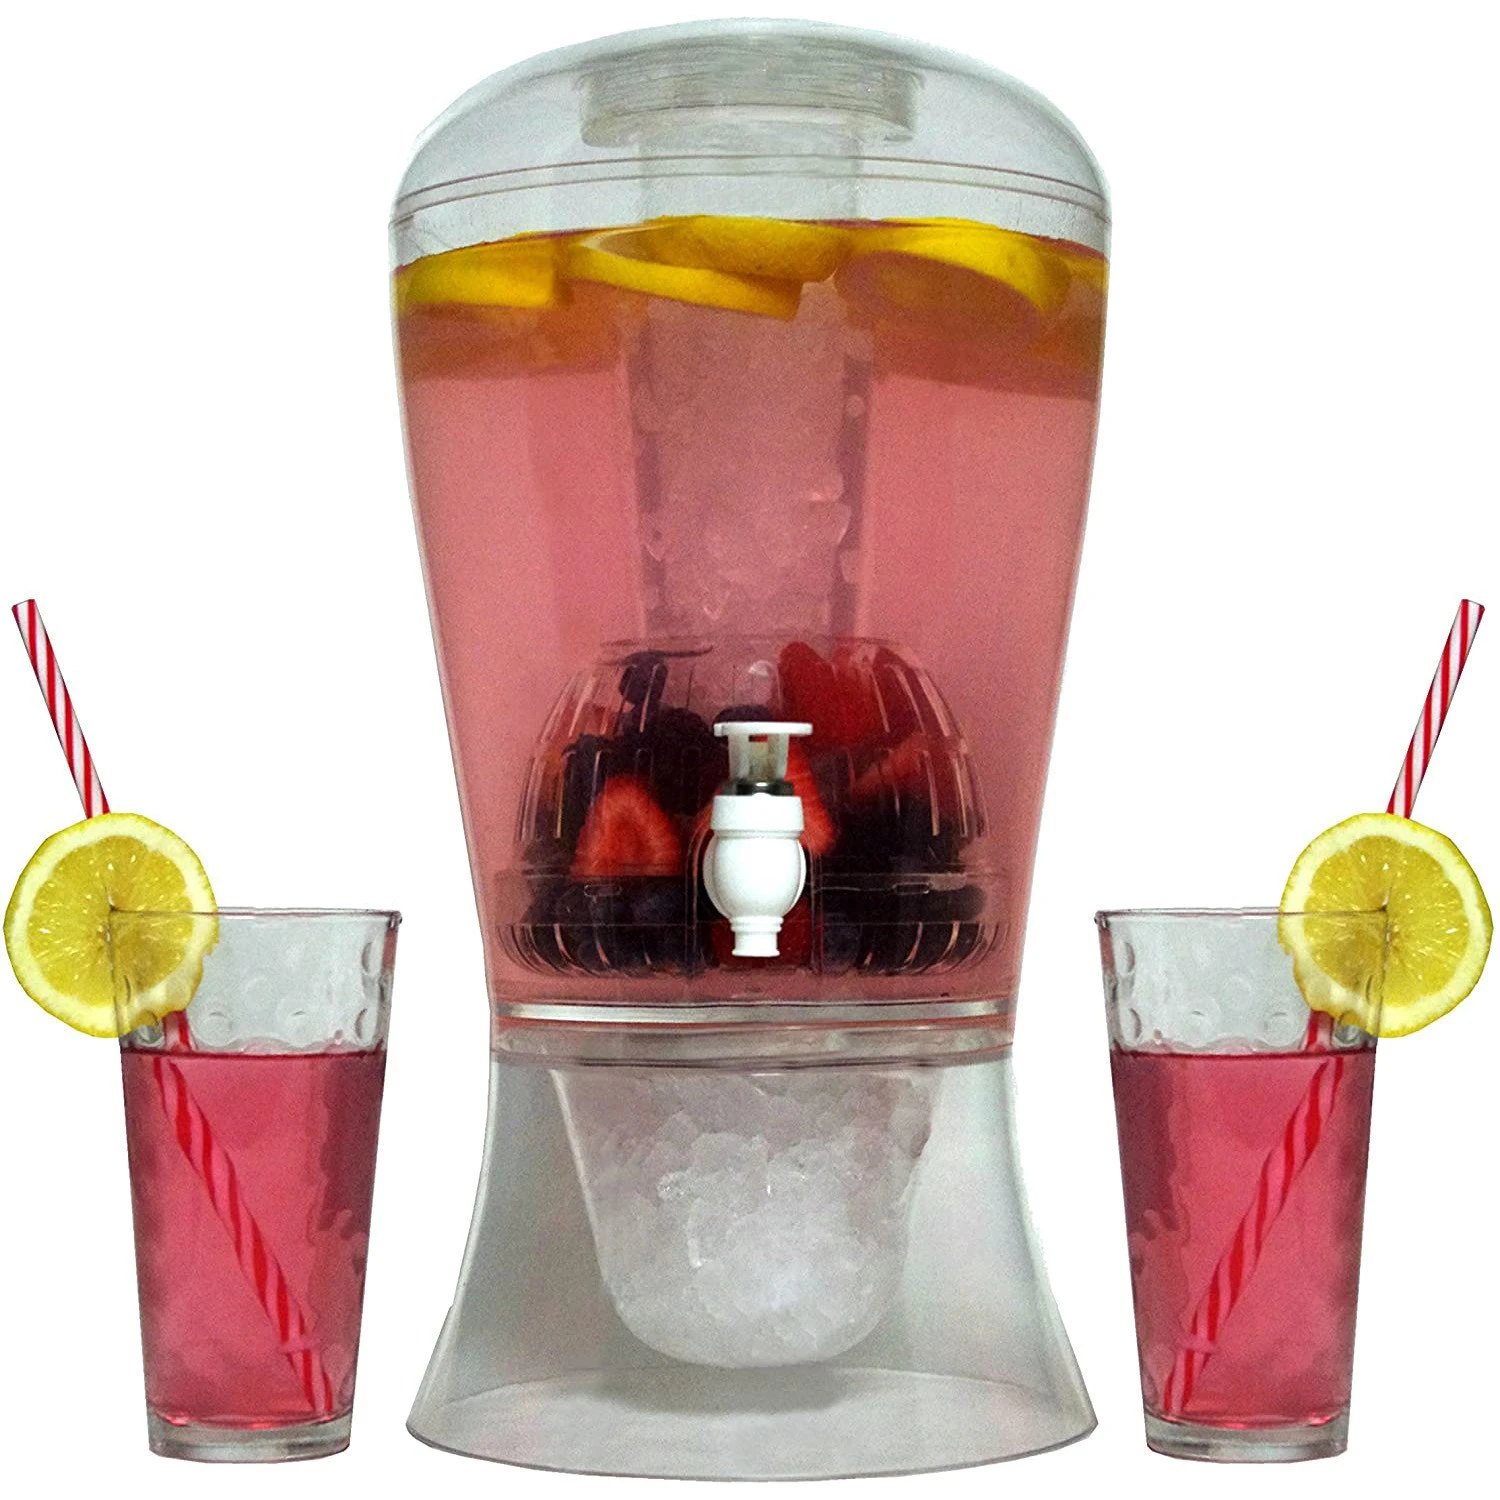 Food Grade Clear 2 Gallon Beverage Dispenser Acrylic Drink Dispenser with Cooling Ice Cylinder, Infusion Bowl for Fruit